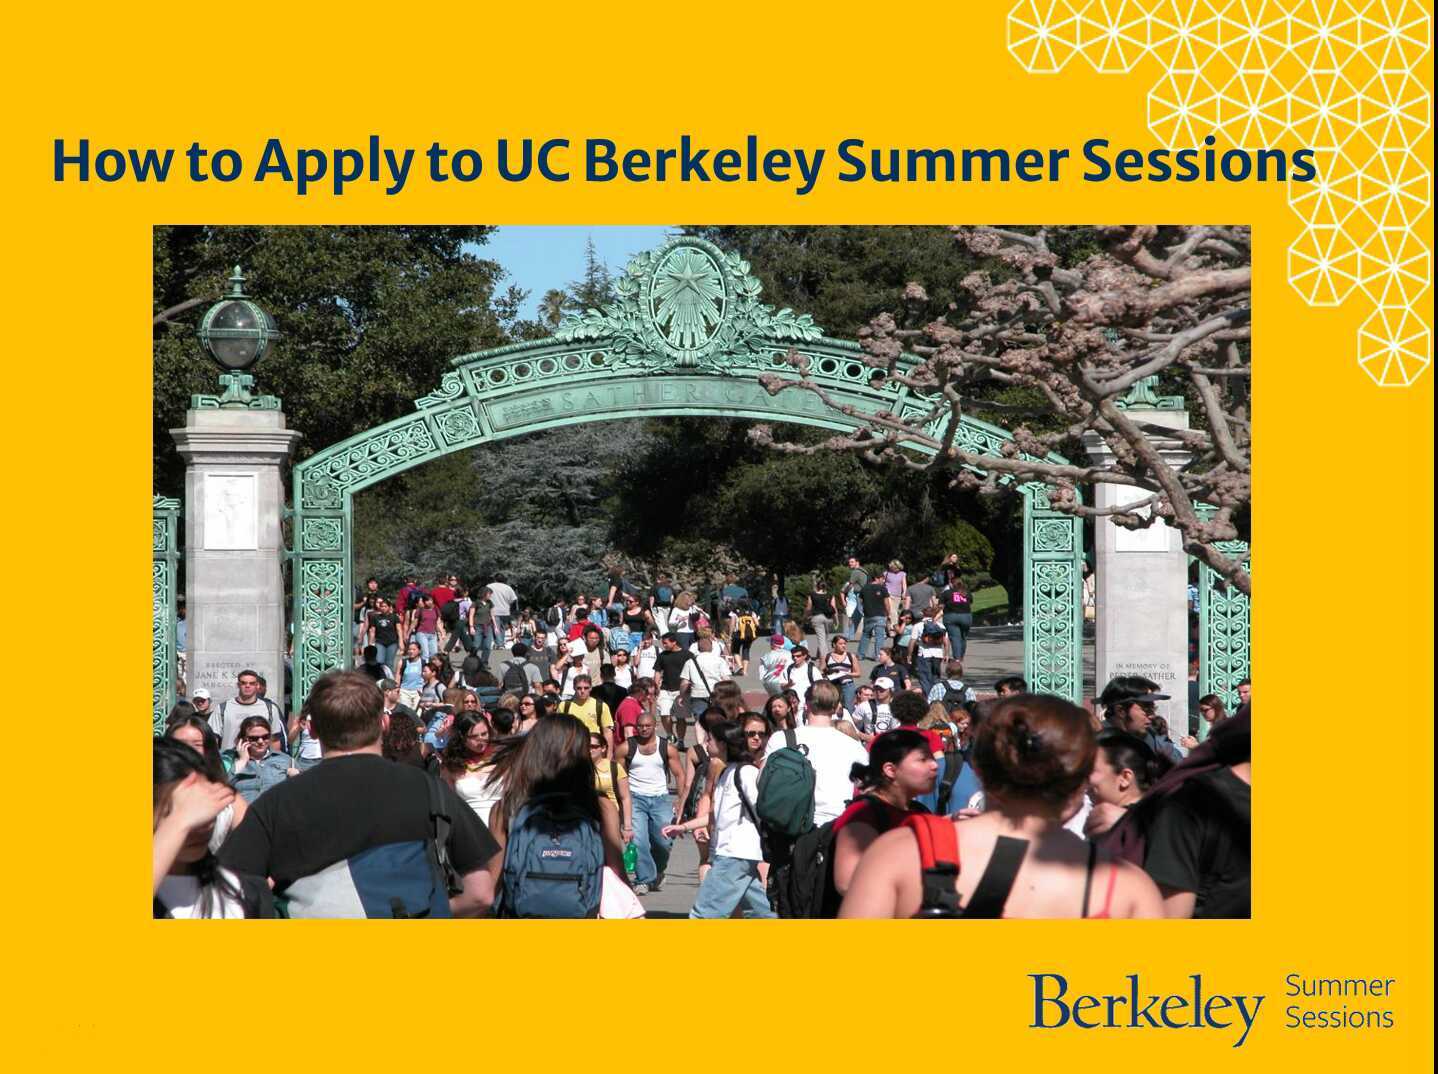 How to Apply to UC Berkeley Summer Sessions